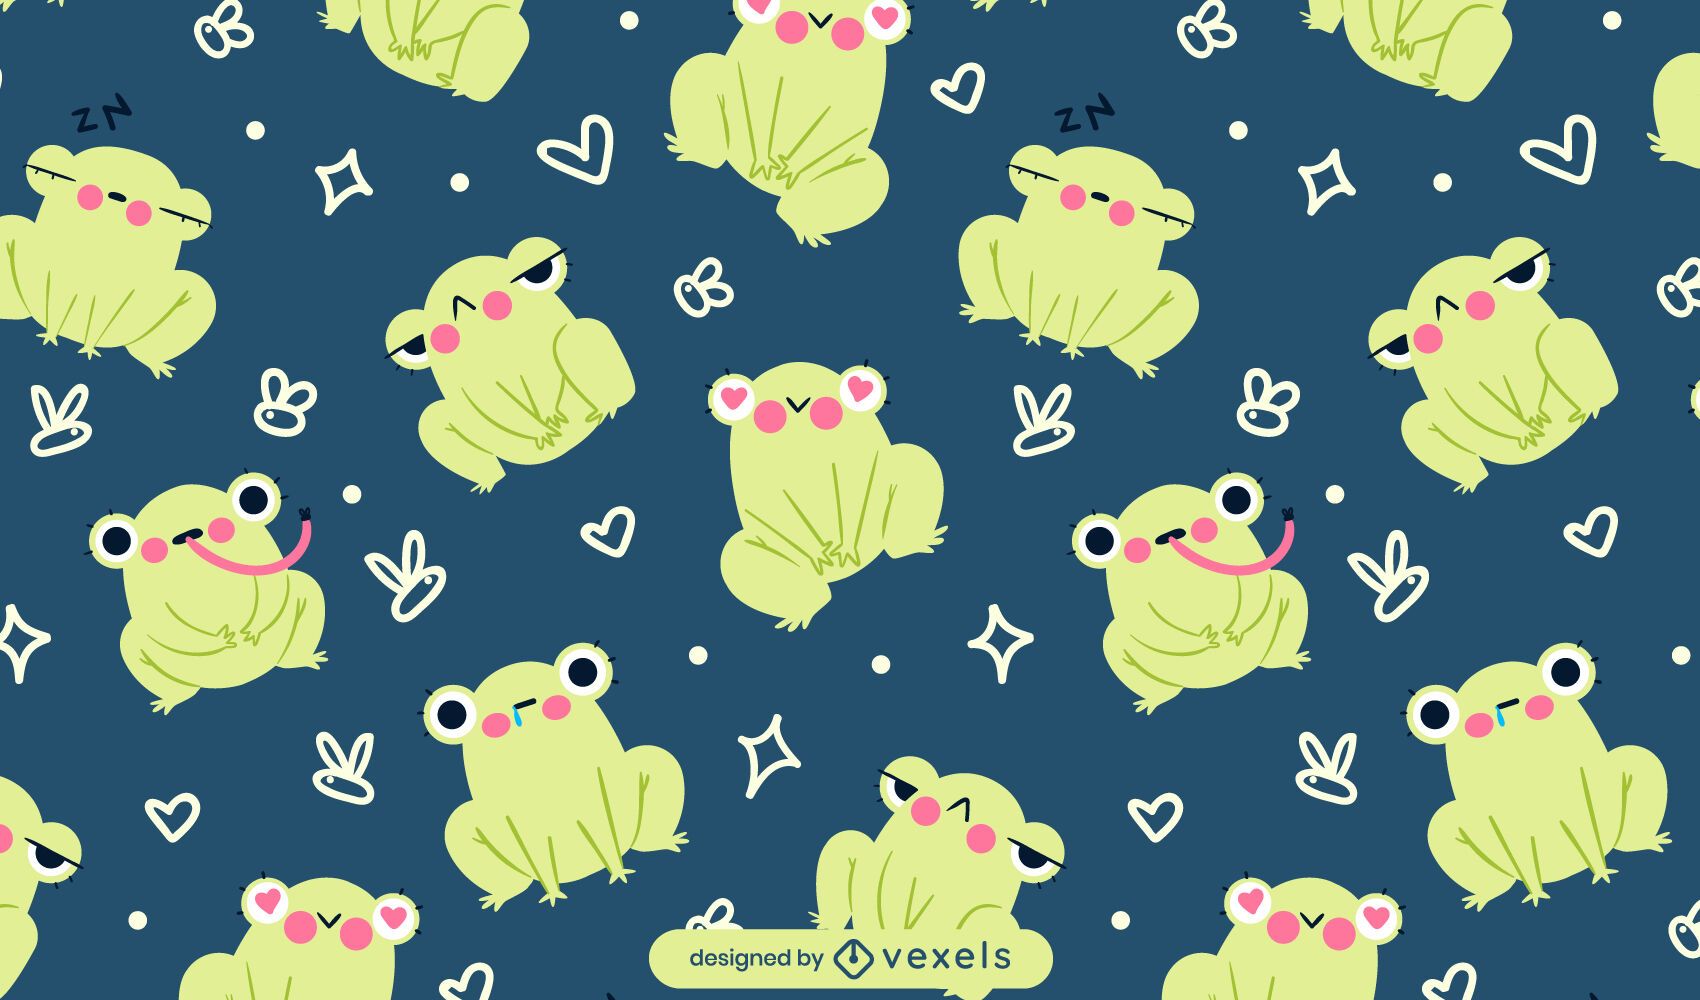 Frogs Vector & Graphics to Download